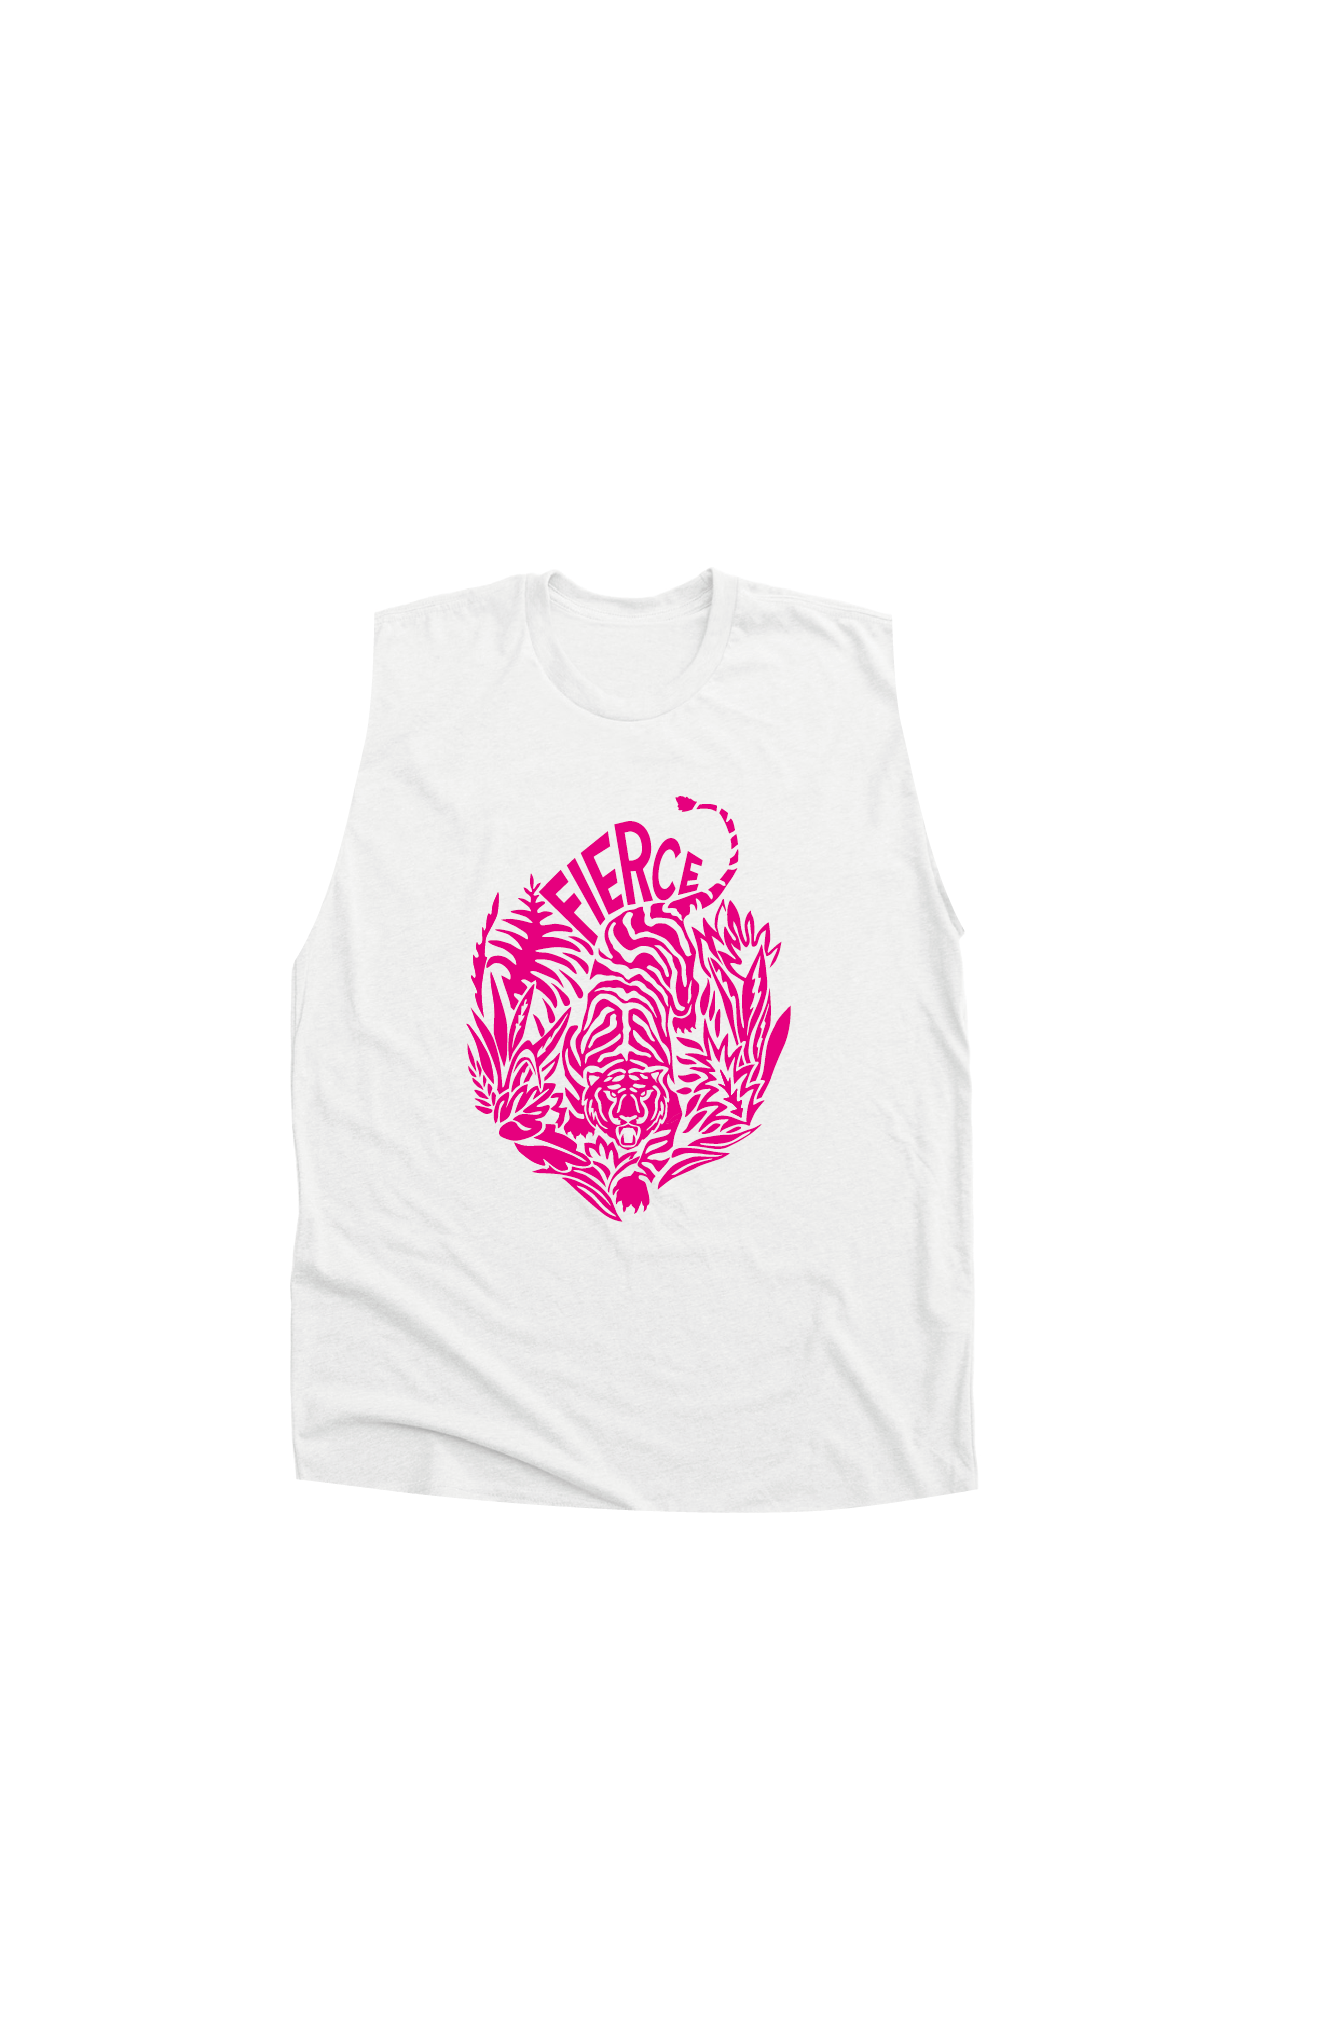 Ladies white tank top with a light neon print of a tiger on the front